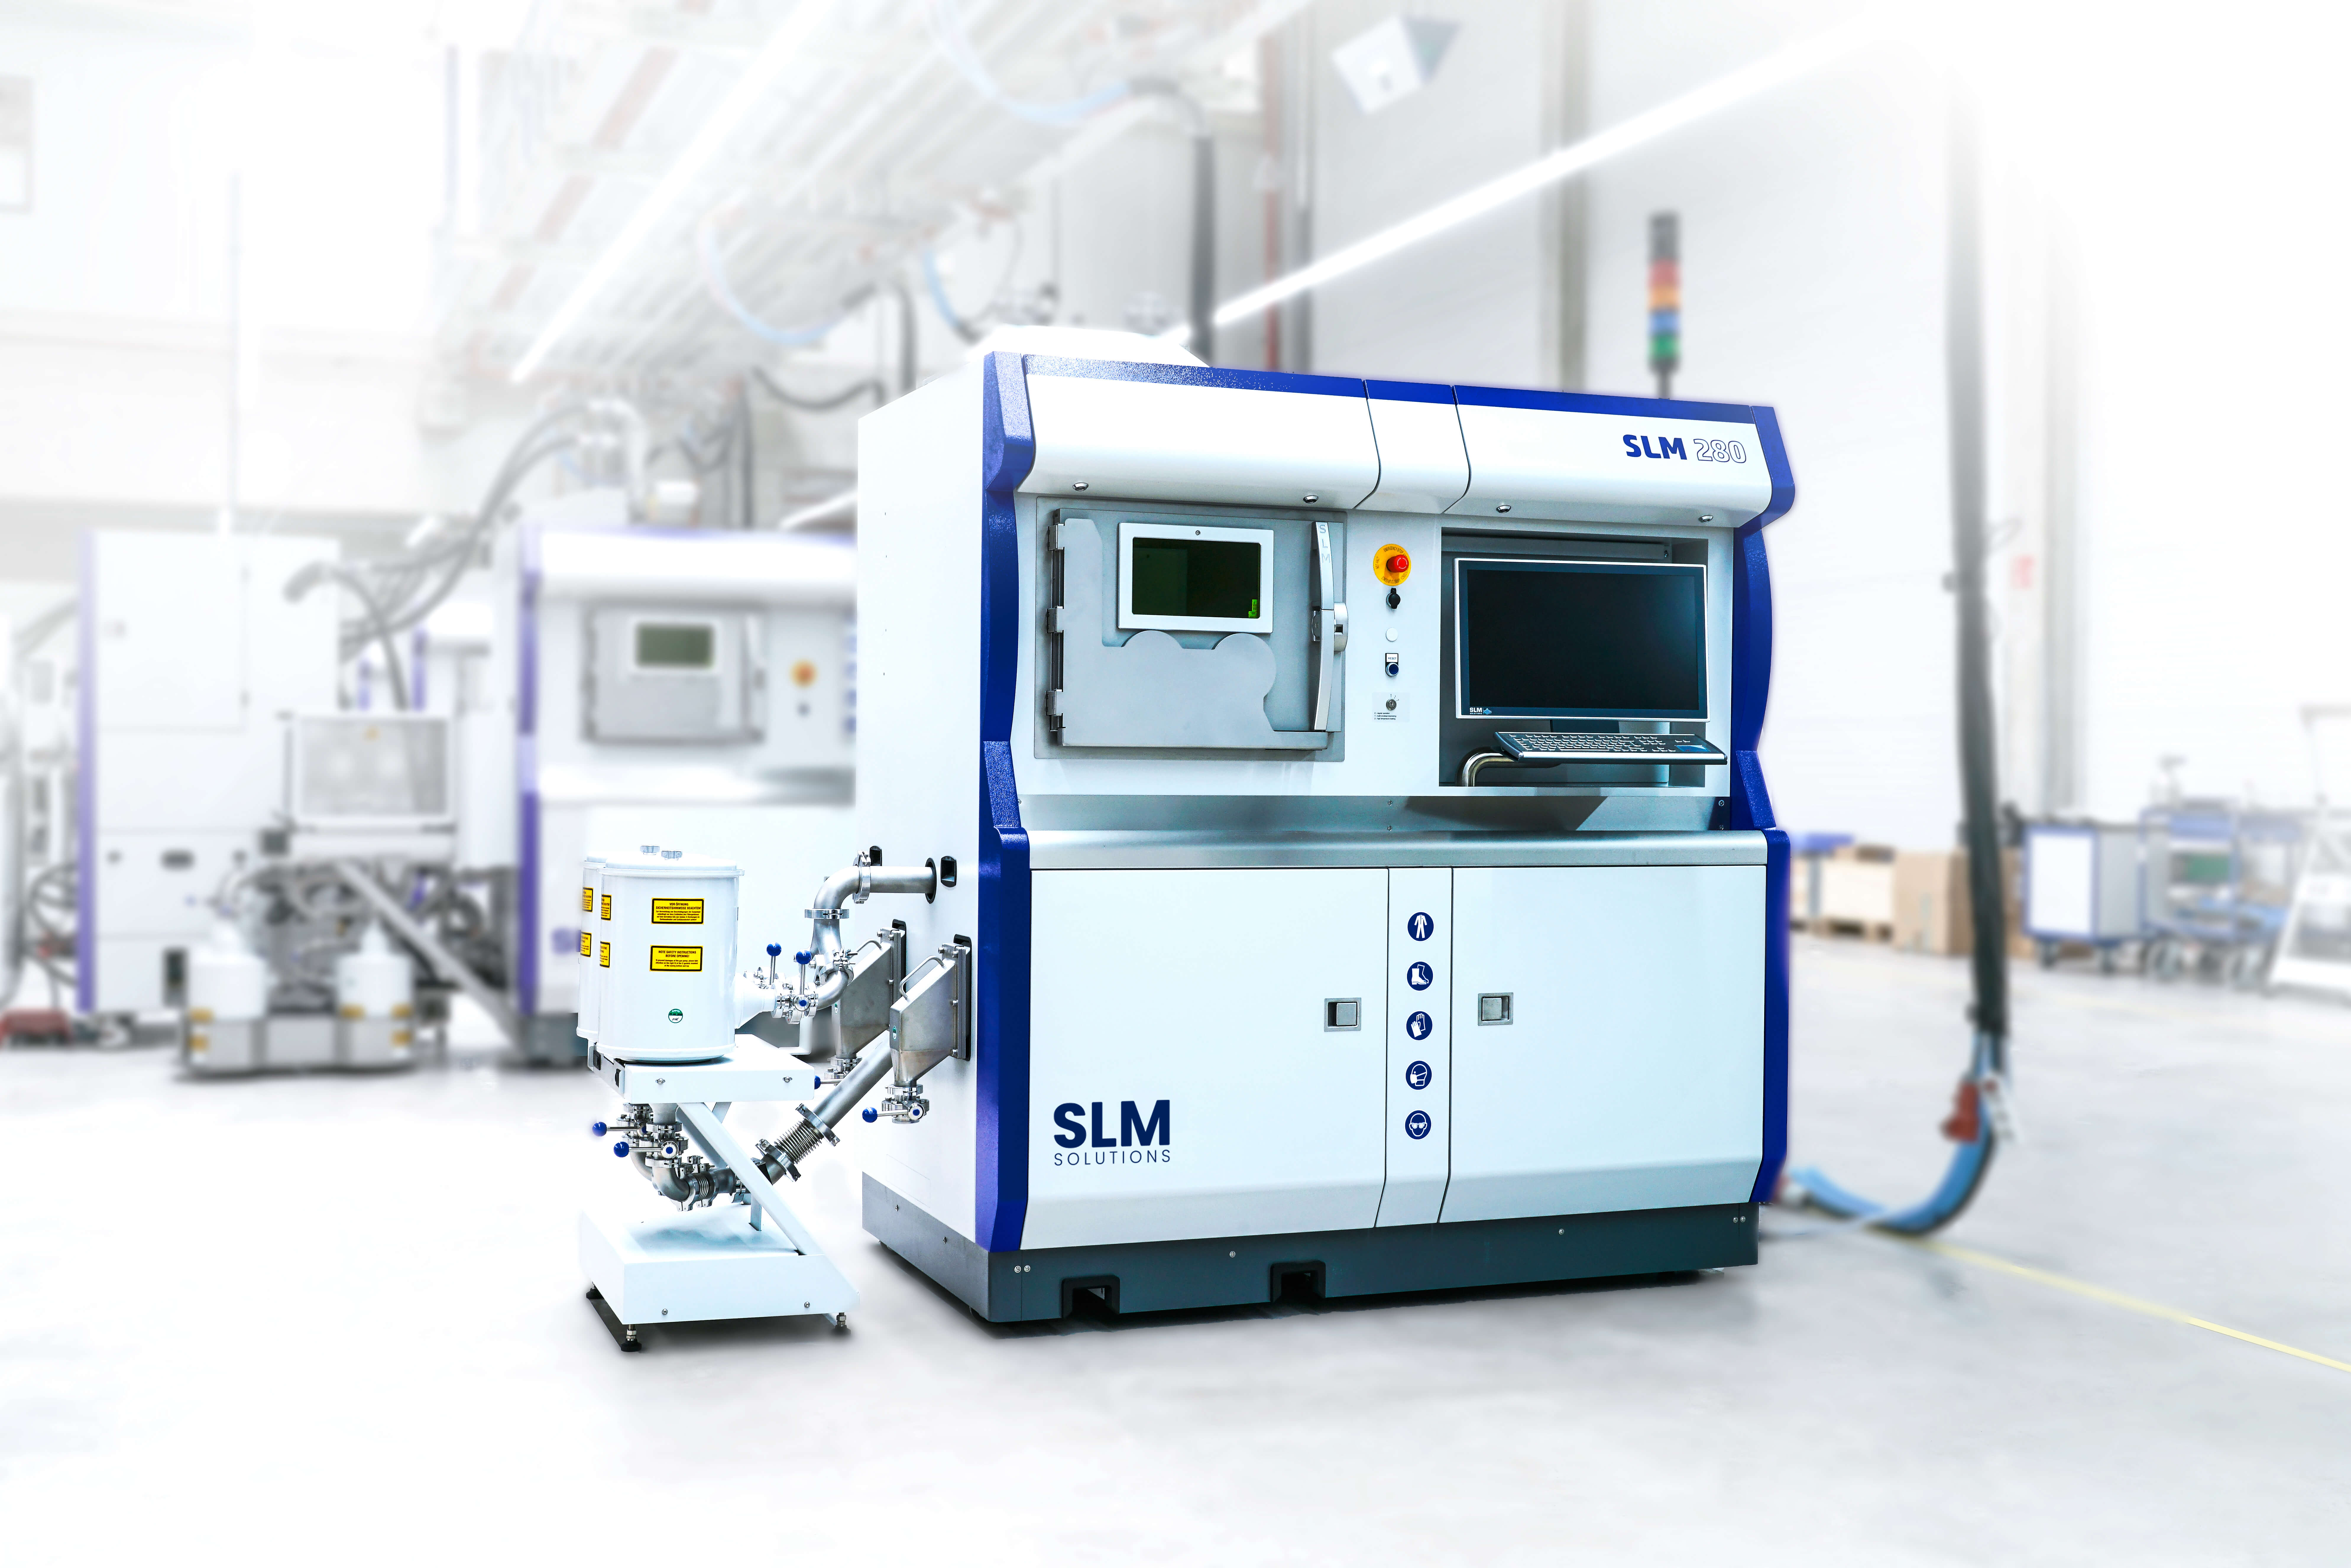 SLM Solutions and Elementum 3D have joined forces to develop new powders for 3D printing.